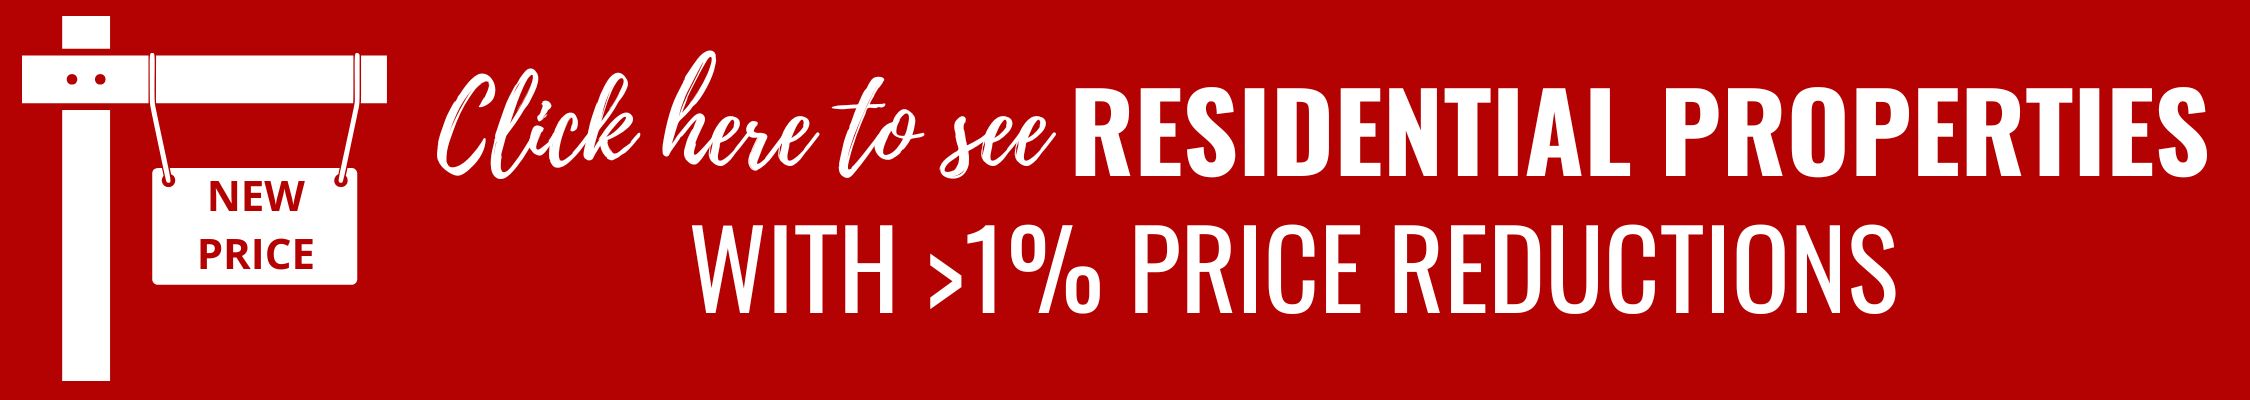 Price-Reduced Homes for Sale